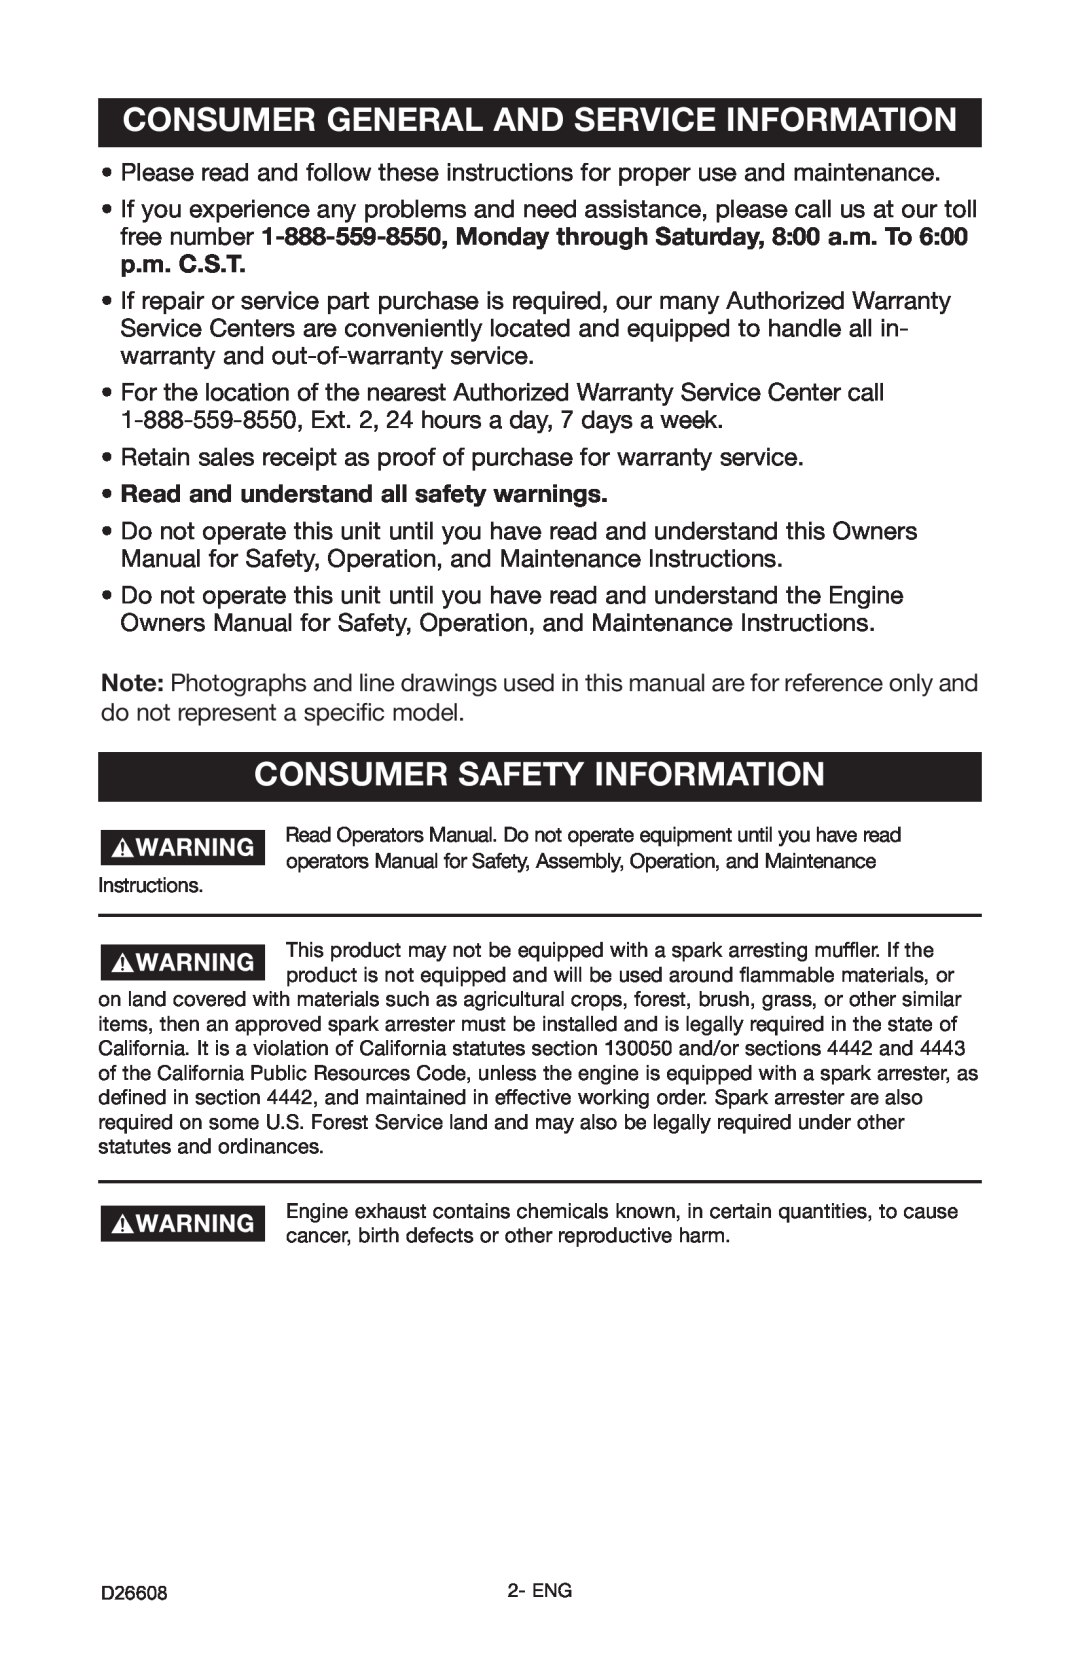 Porter-Cable DBSI325 instruction manual Consumer General And Service Information, Consumer Safety Information 